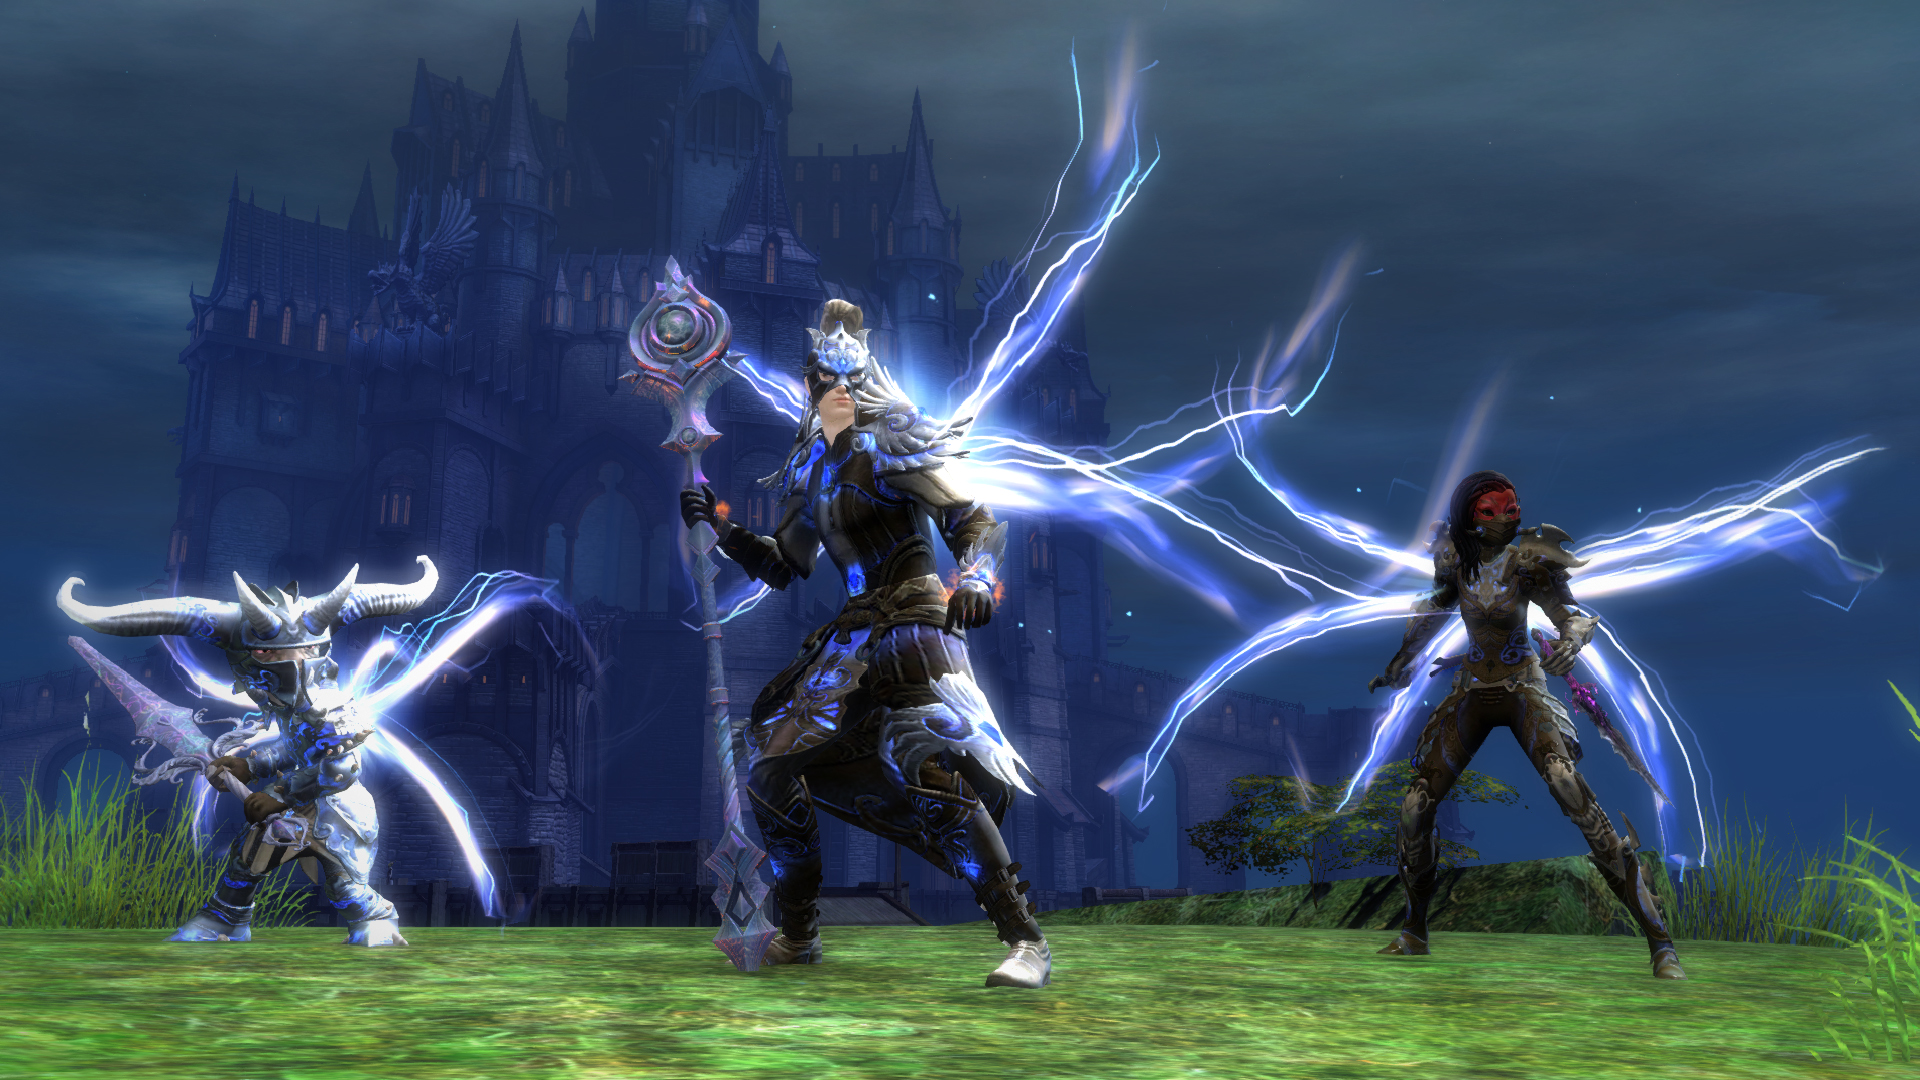 A screenshot of Guild Wars 2, depicting three players in the World versus World game mode